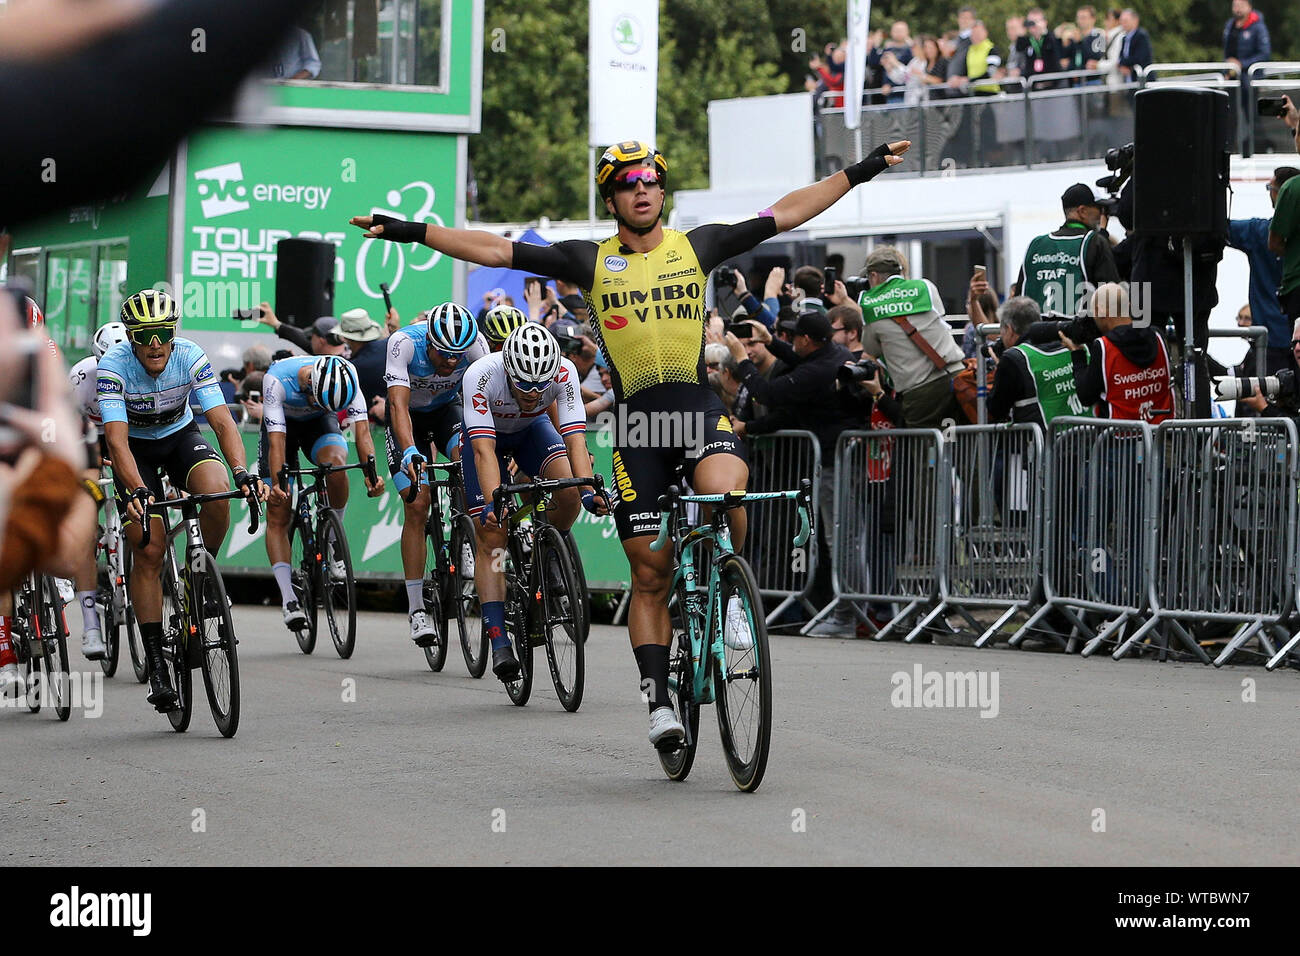 Birkenhead, UK. 11th Sep, 2019. Dylan Groenewegen from Holland riding for Team Jumbo-Visma crosses the finish line and wins stage 5. OVO Energy Tour of Britain 2019, stage5, Wirral Stage, Birkenhead to Birkenhead on Wednesday 11th September 2019. picture by Chris Stading/Andrew Orchard sports photography/Alamy Live News Credit: Andrew Orchard sports photography/Alamy Live News Stock Photo